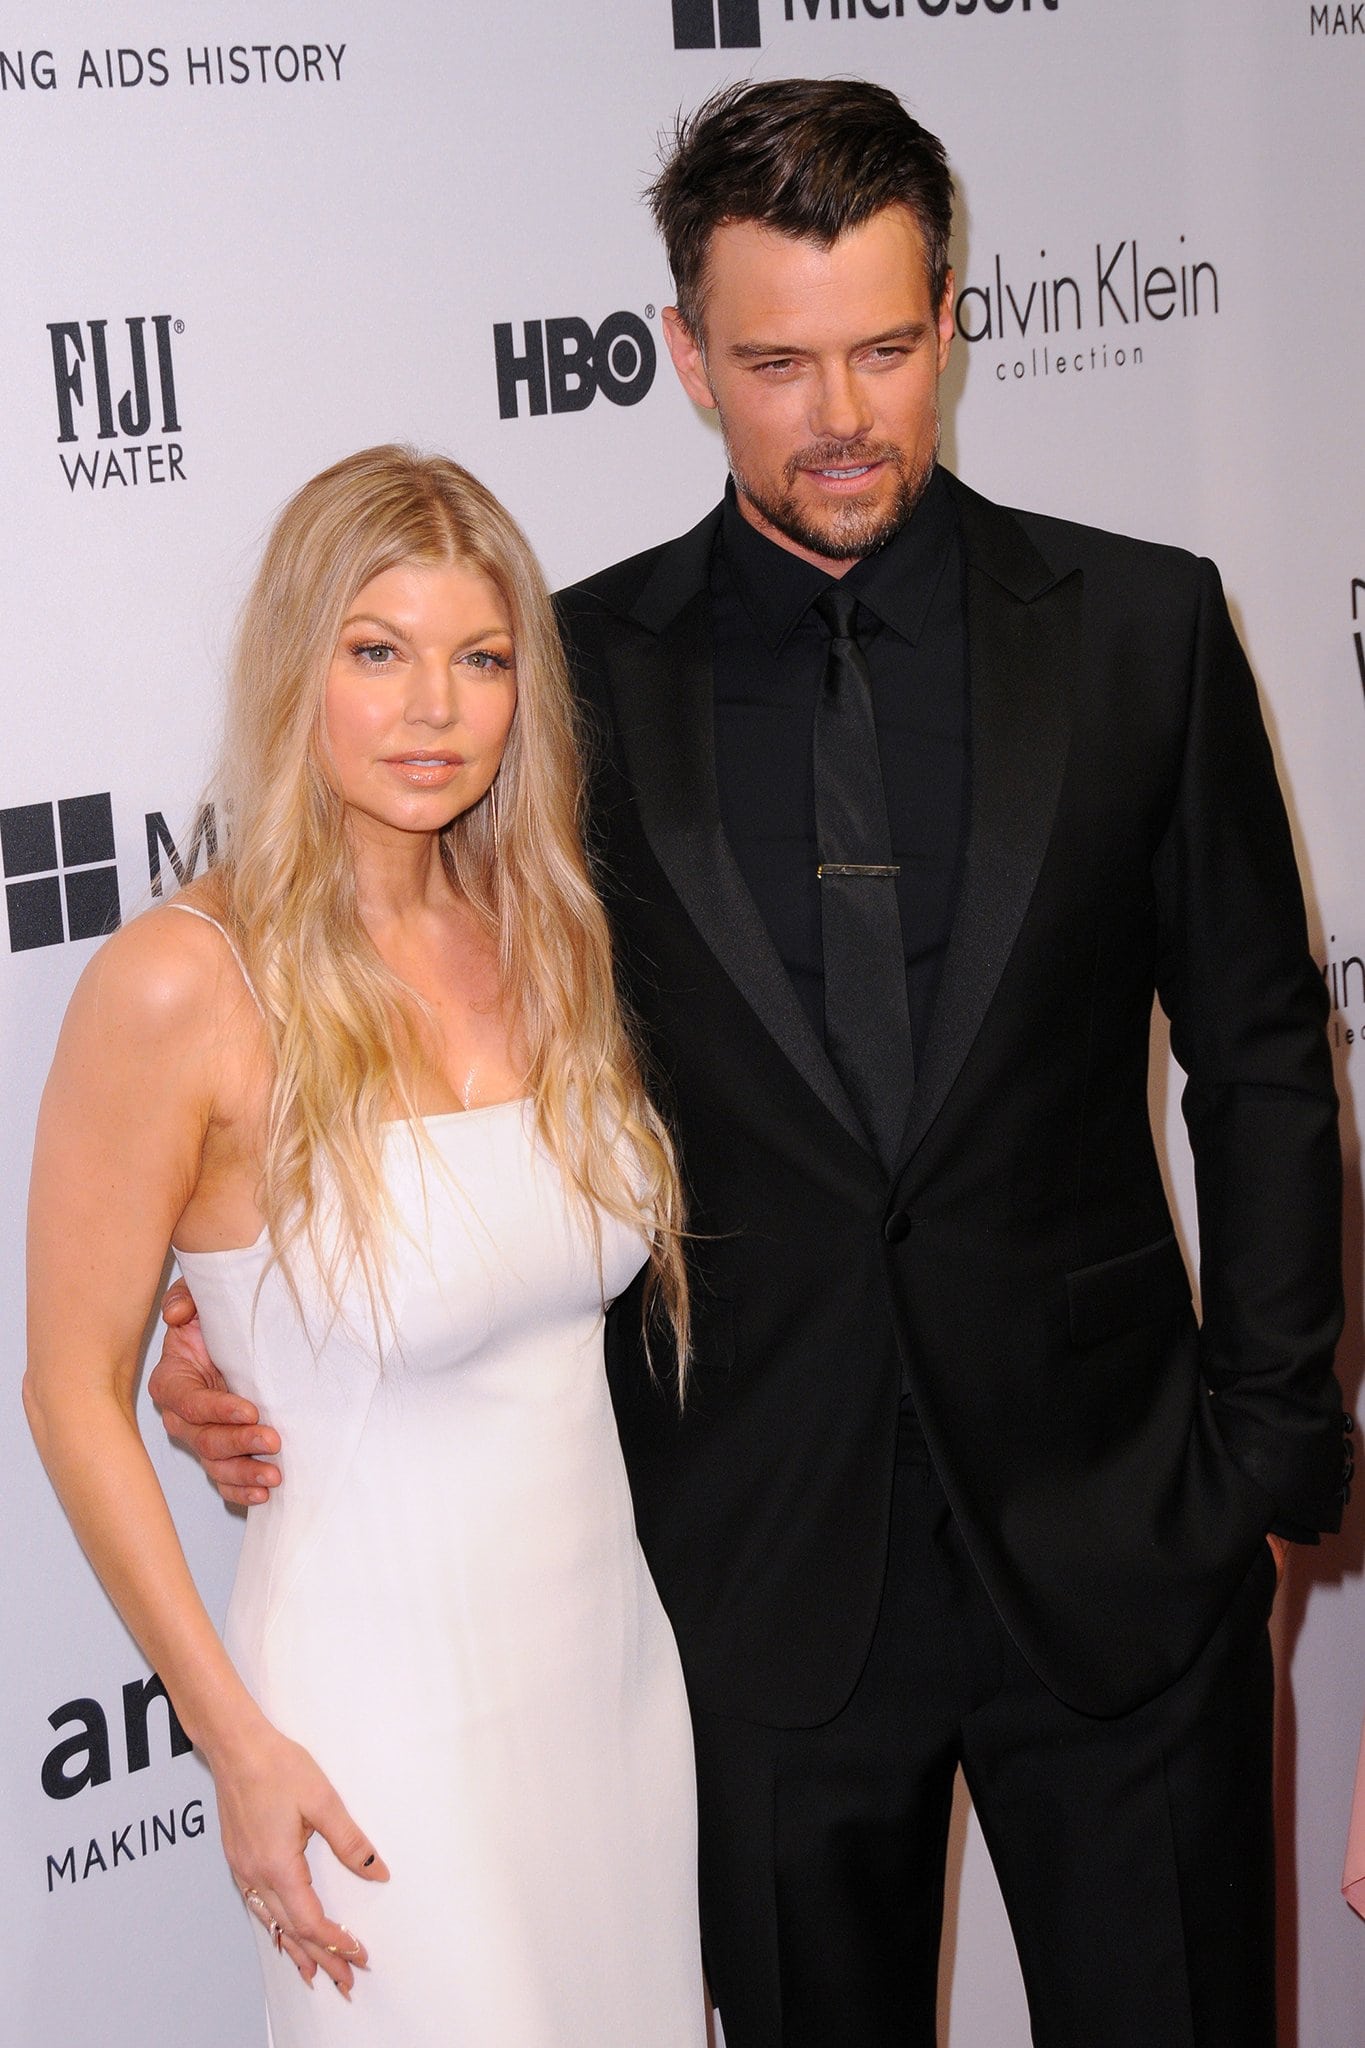 Fergie and Josh Duhamel filed for divorce in June 2019 after two years of separation